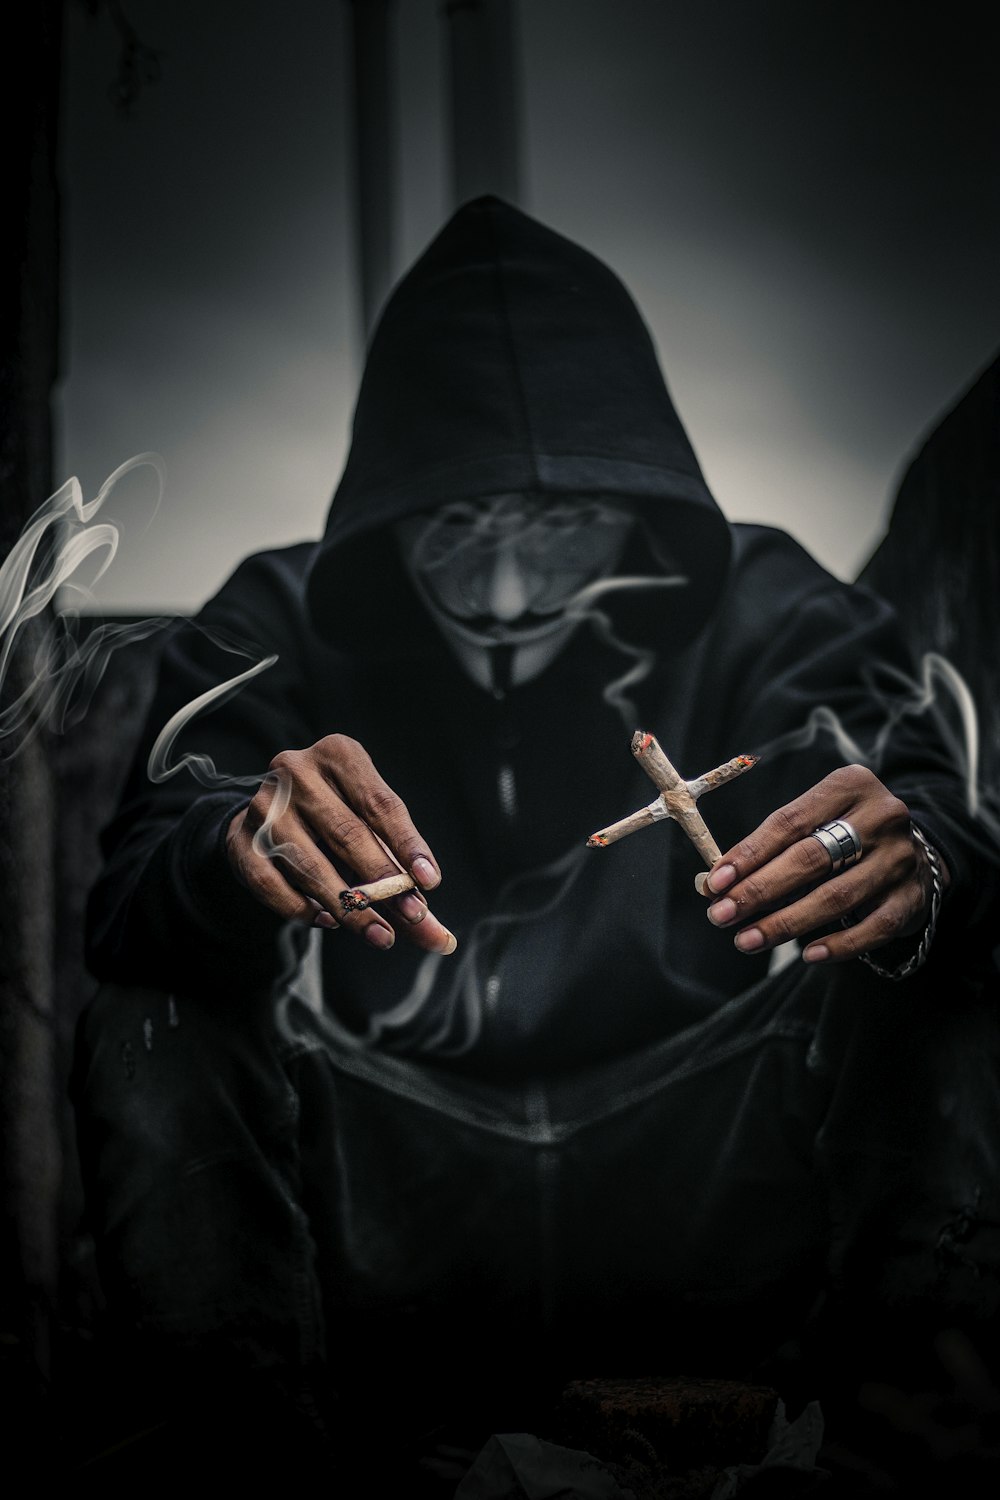 person in Guy Fawkes mask holding cross-shaped lighted cigarettes on his left with lighted joice on right hand